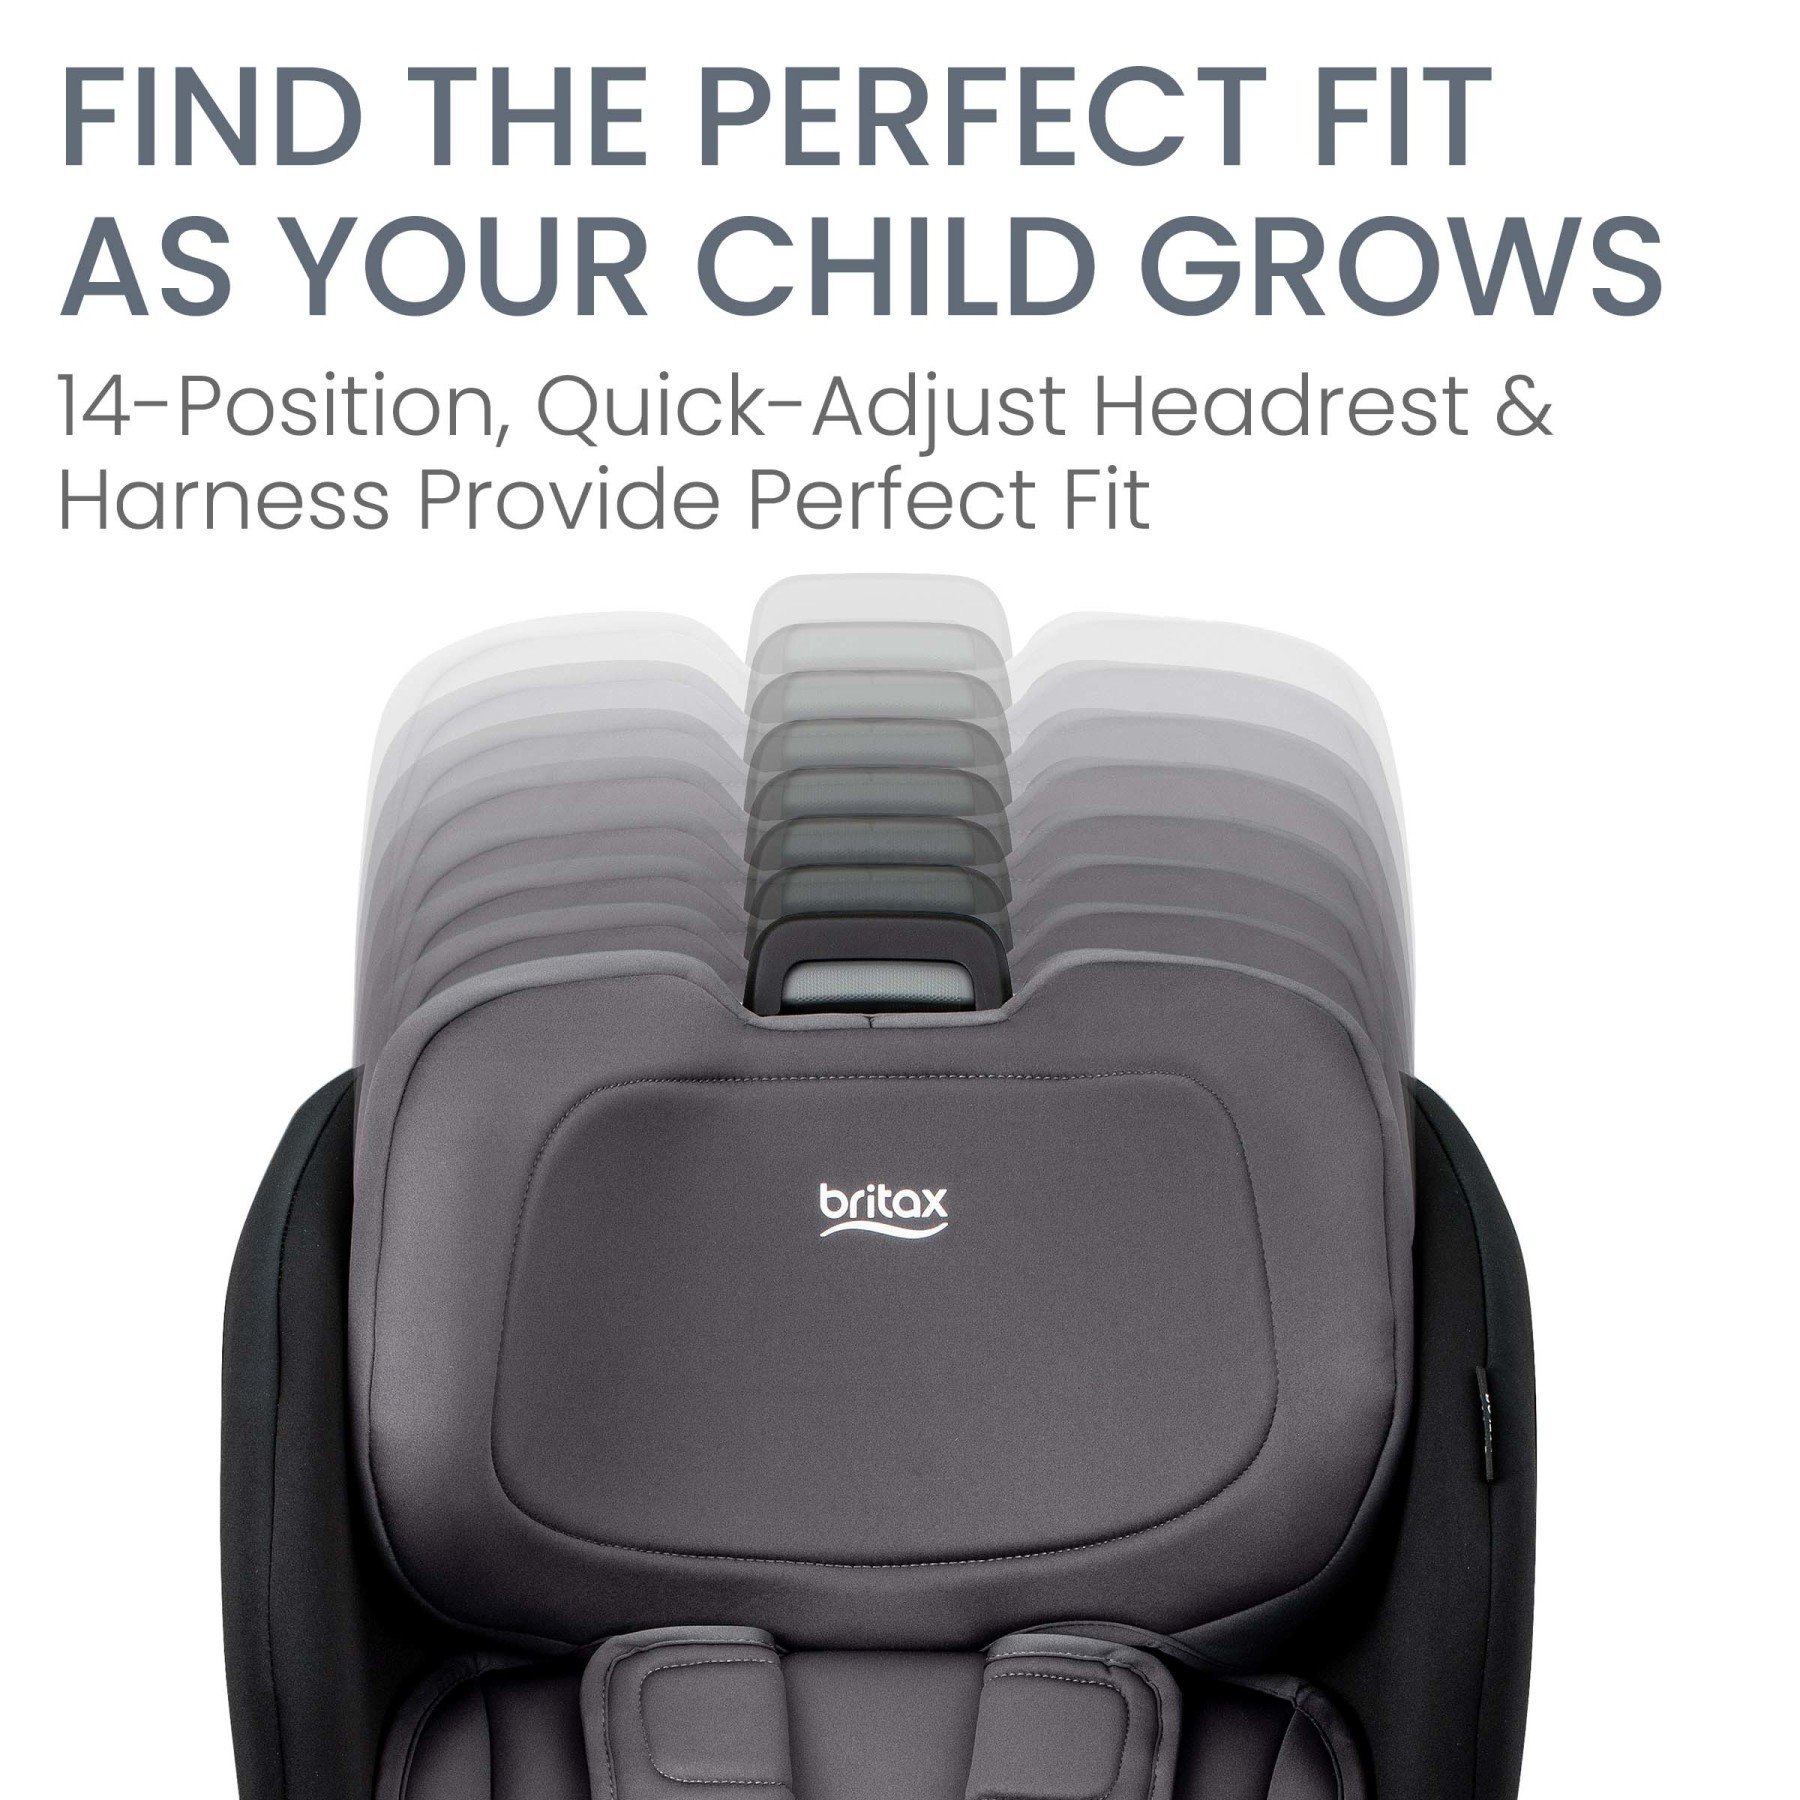 The Perfect Fit as your Child Grows